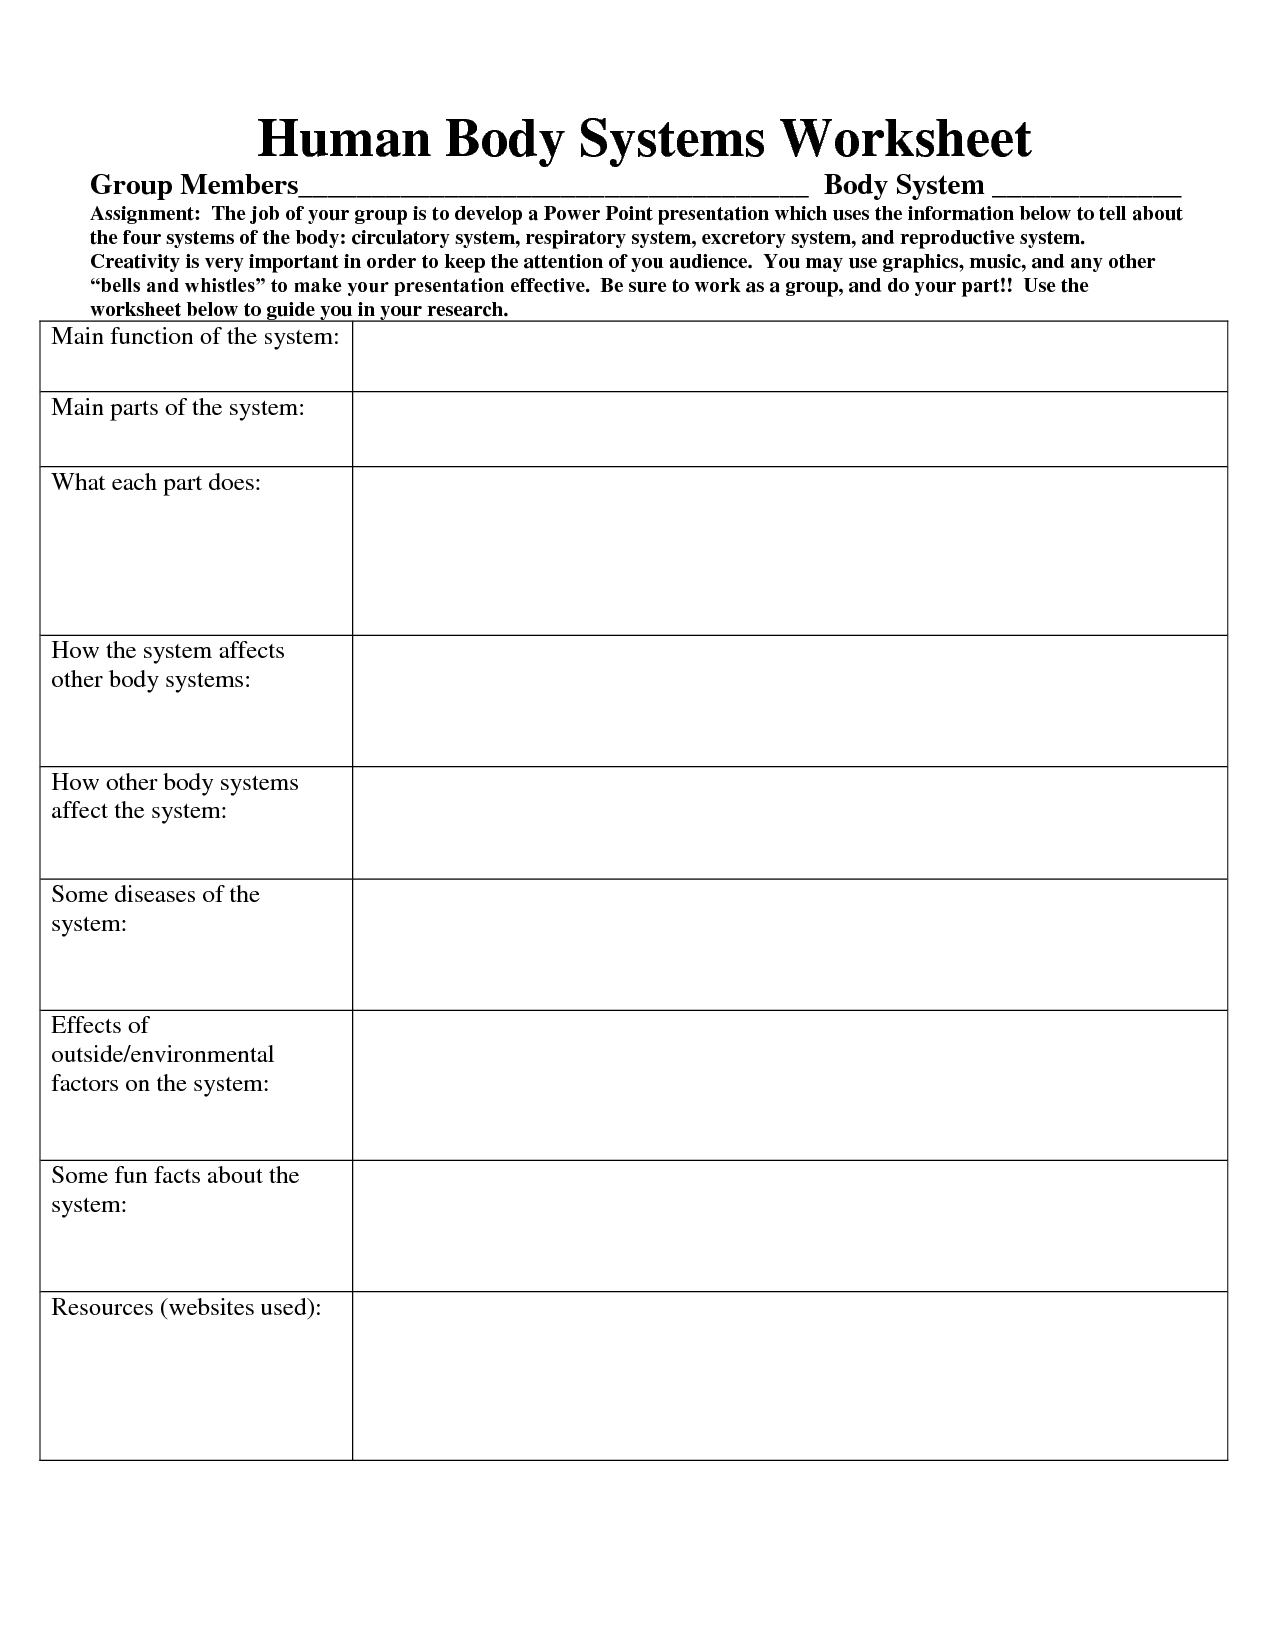 Human Body Systems Worksheets Image